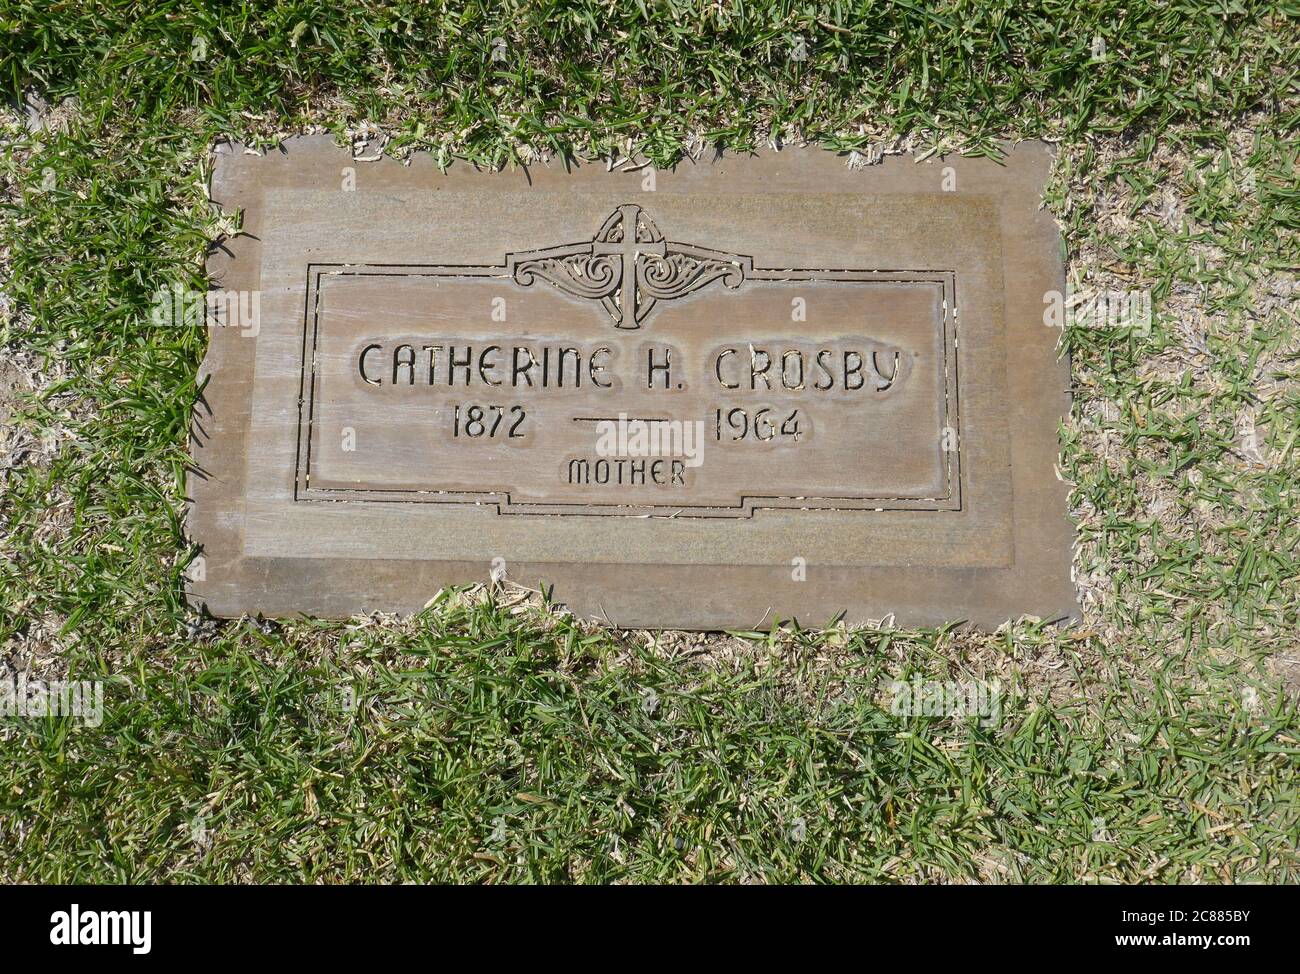 Culver City, California, USA 21st July 2020 A general view of atmosphere of Catherine Crosby's Grave in Grotto Section at Holy Cross Cemetery on July 21, 2020 in Culver City, California, USA. Photo by Barry King/Alamy Stock Photo Stock Photo